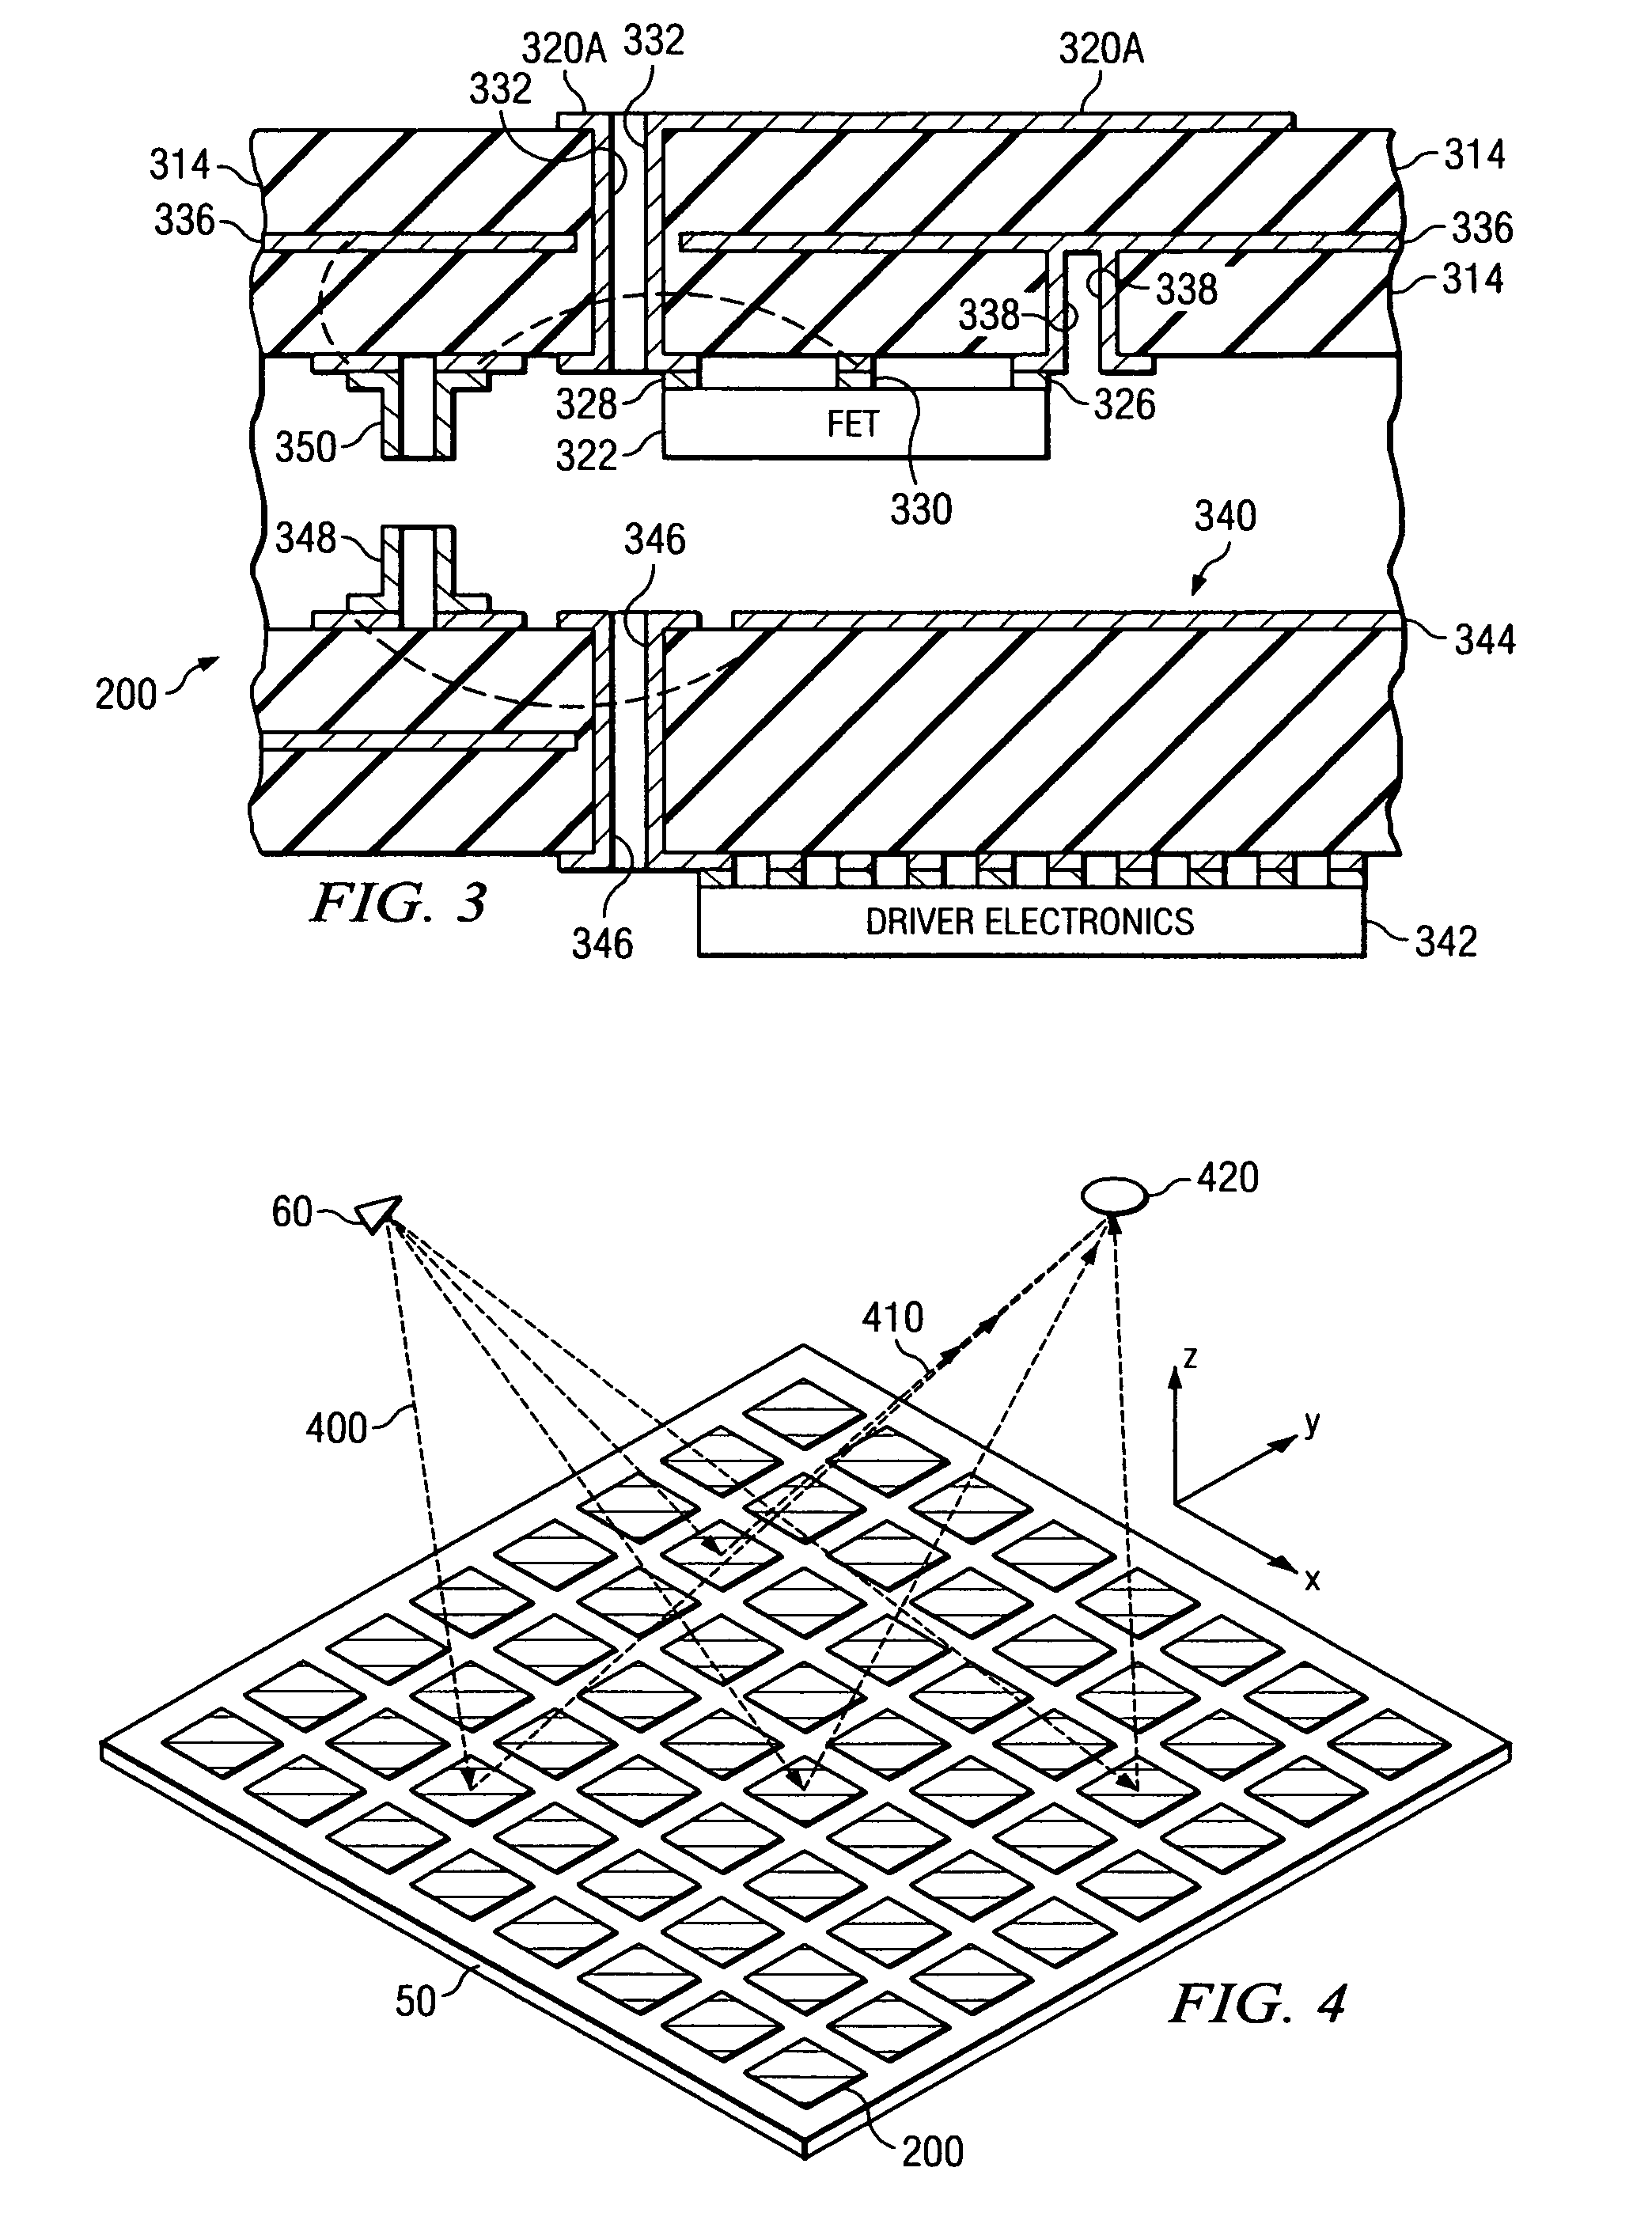 System and method for inspecting transportable items using microwave imaging